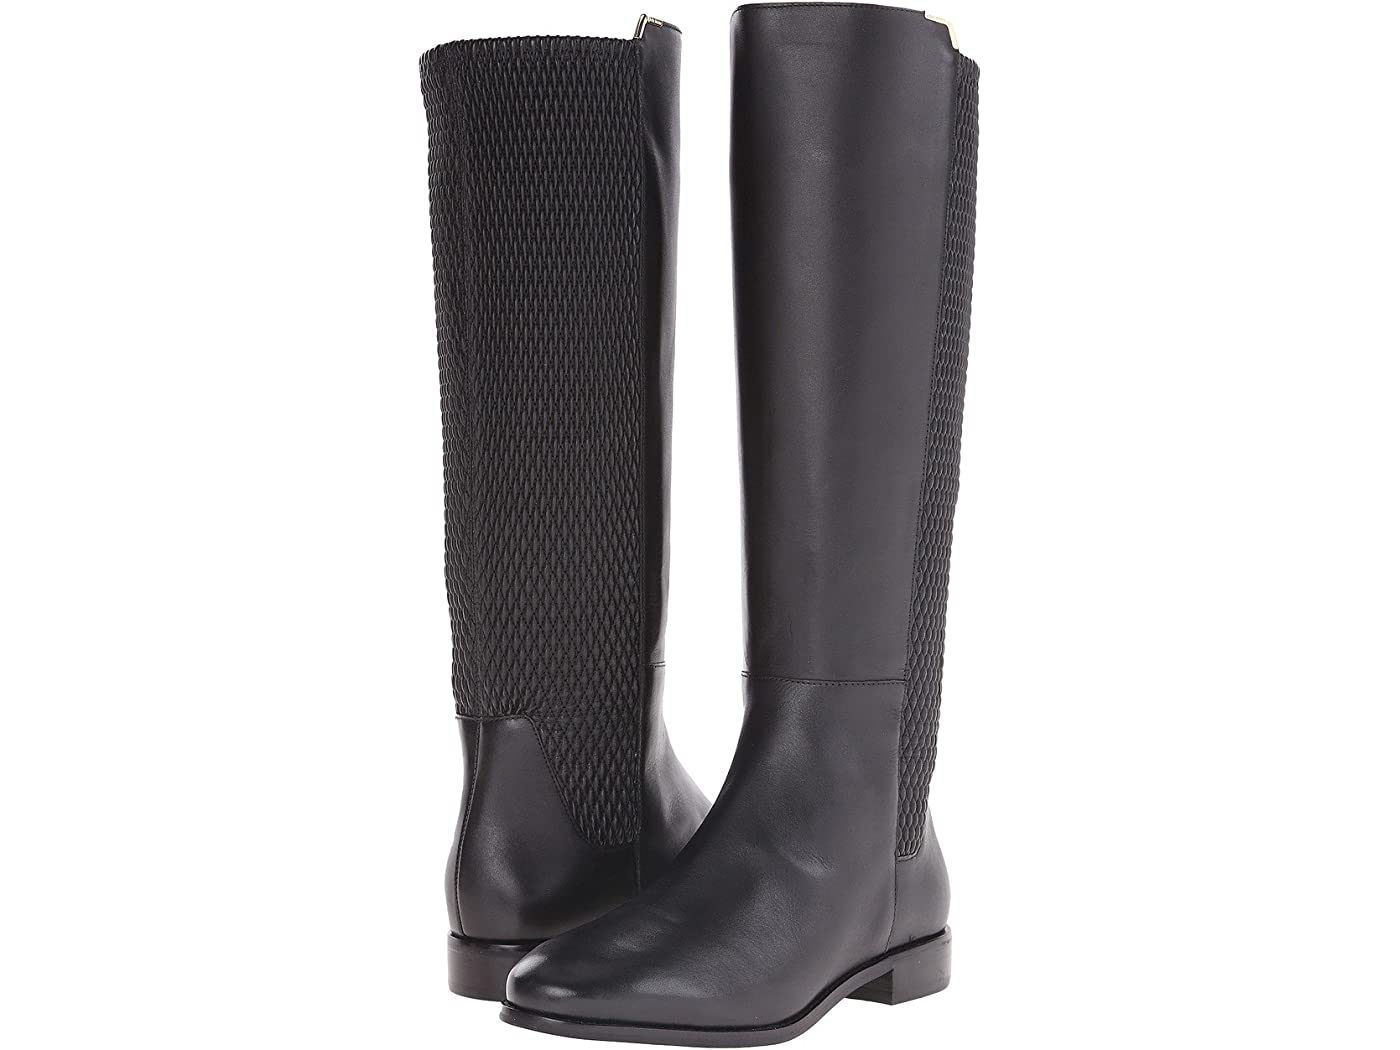 Cole Haan black leather riding boots